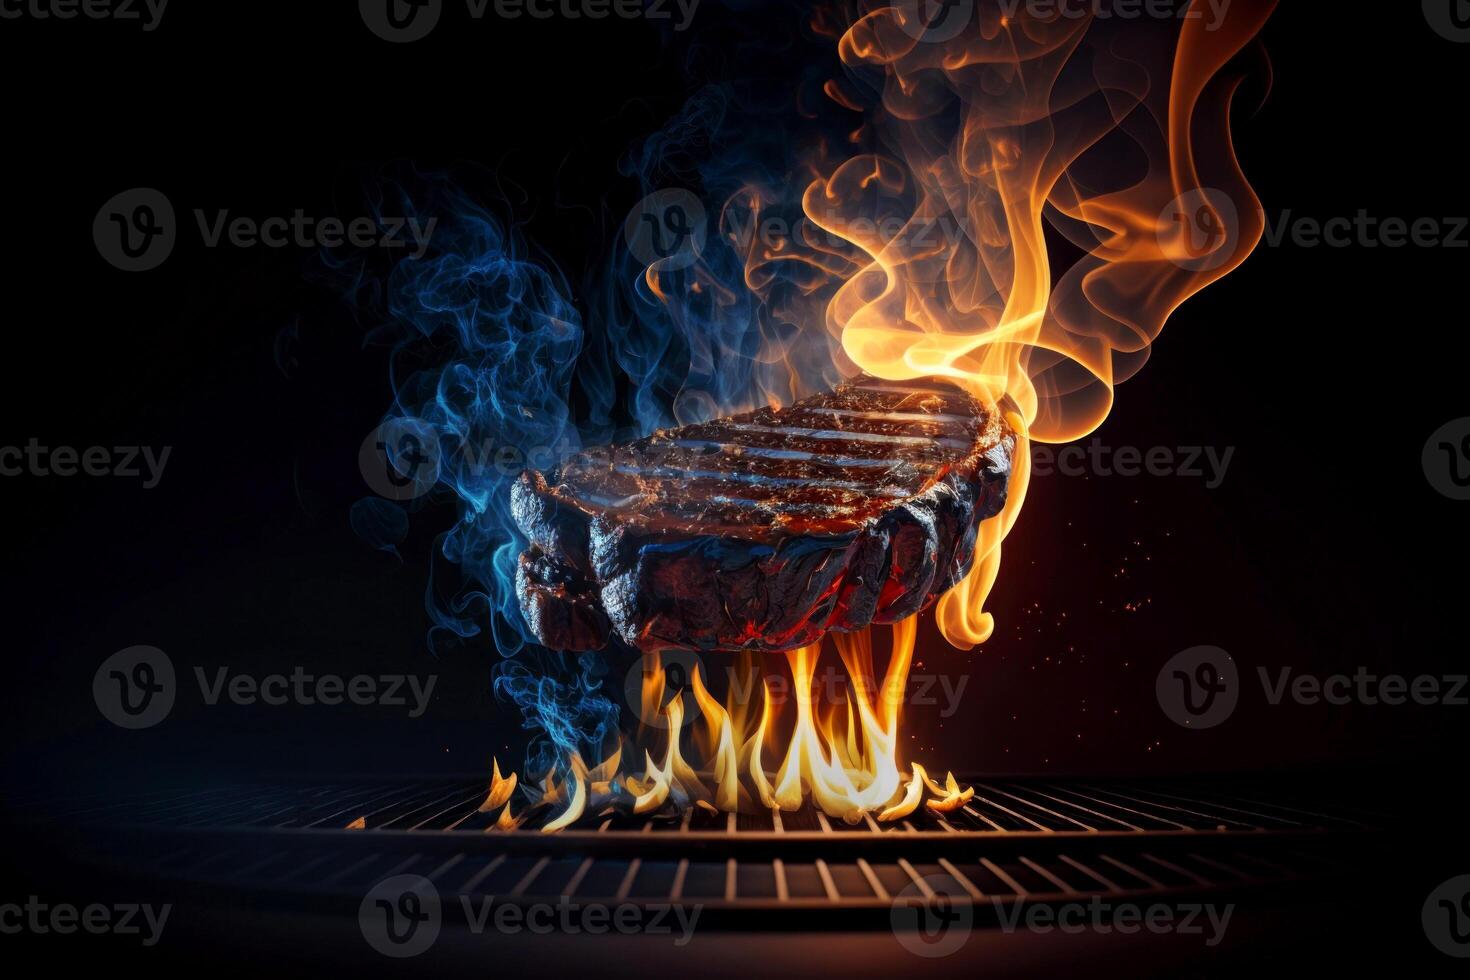 Steak is cooking on a grill with flames in the backgroung of the grill, photo